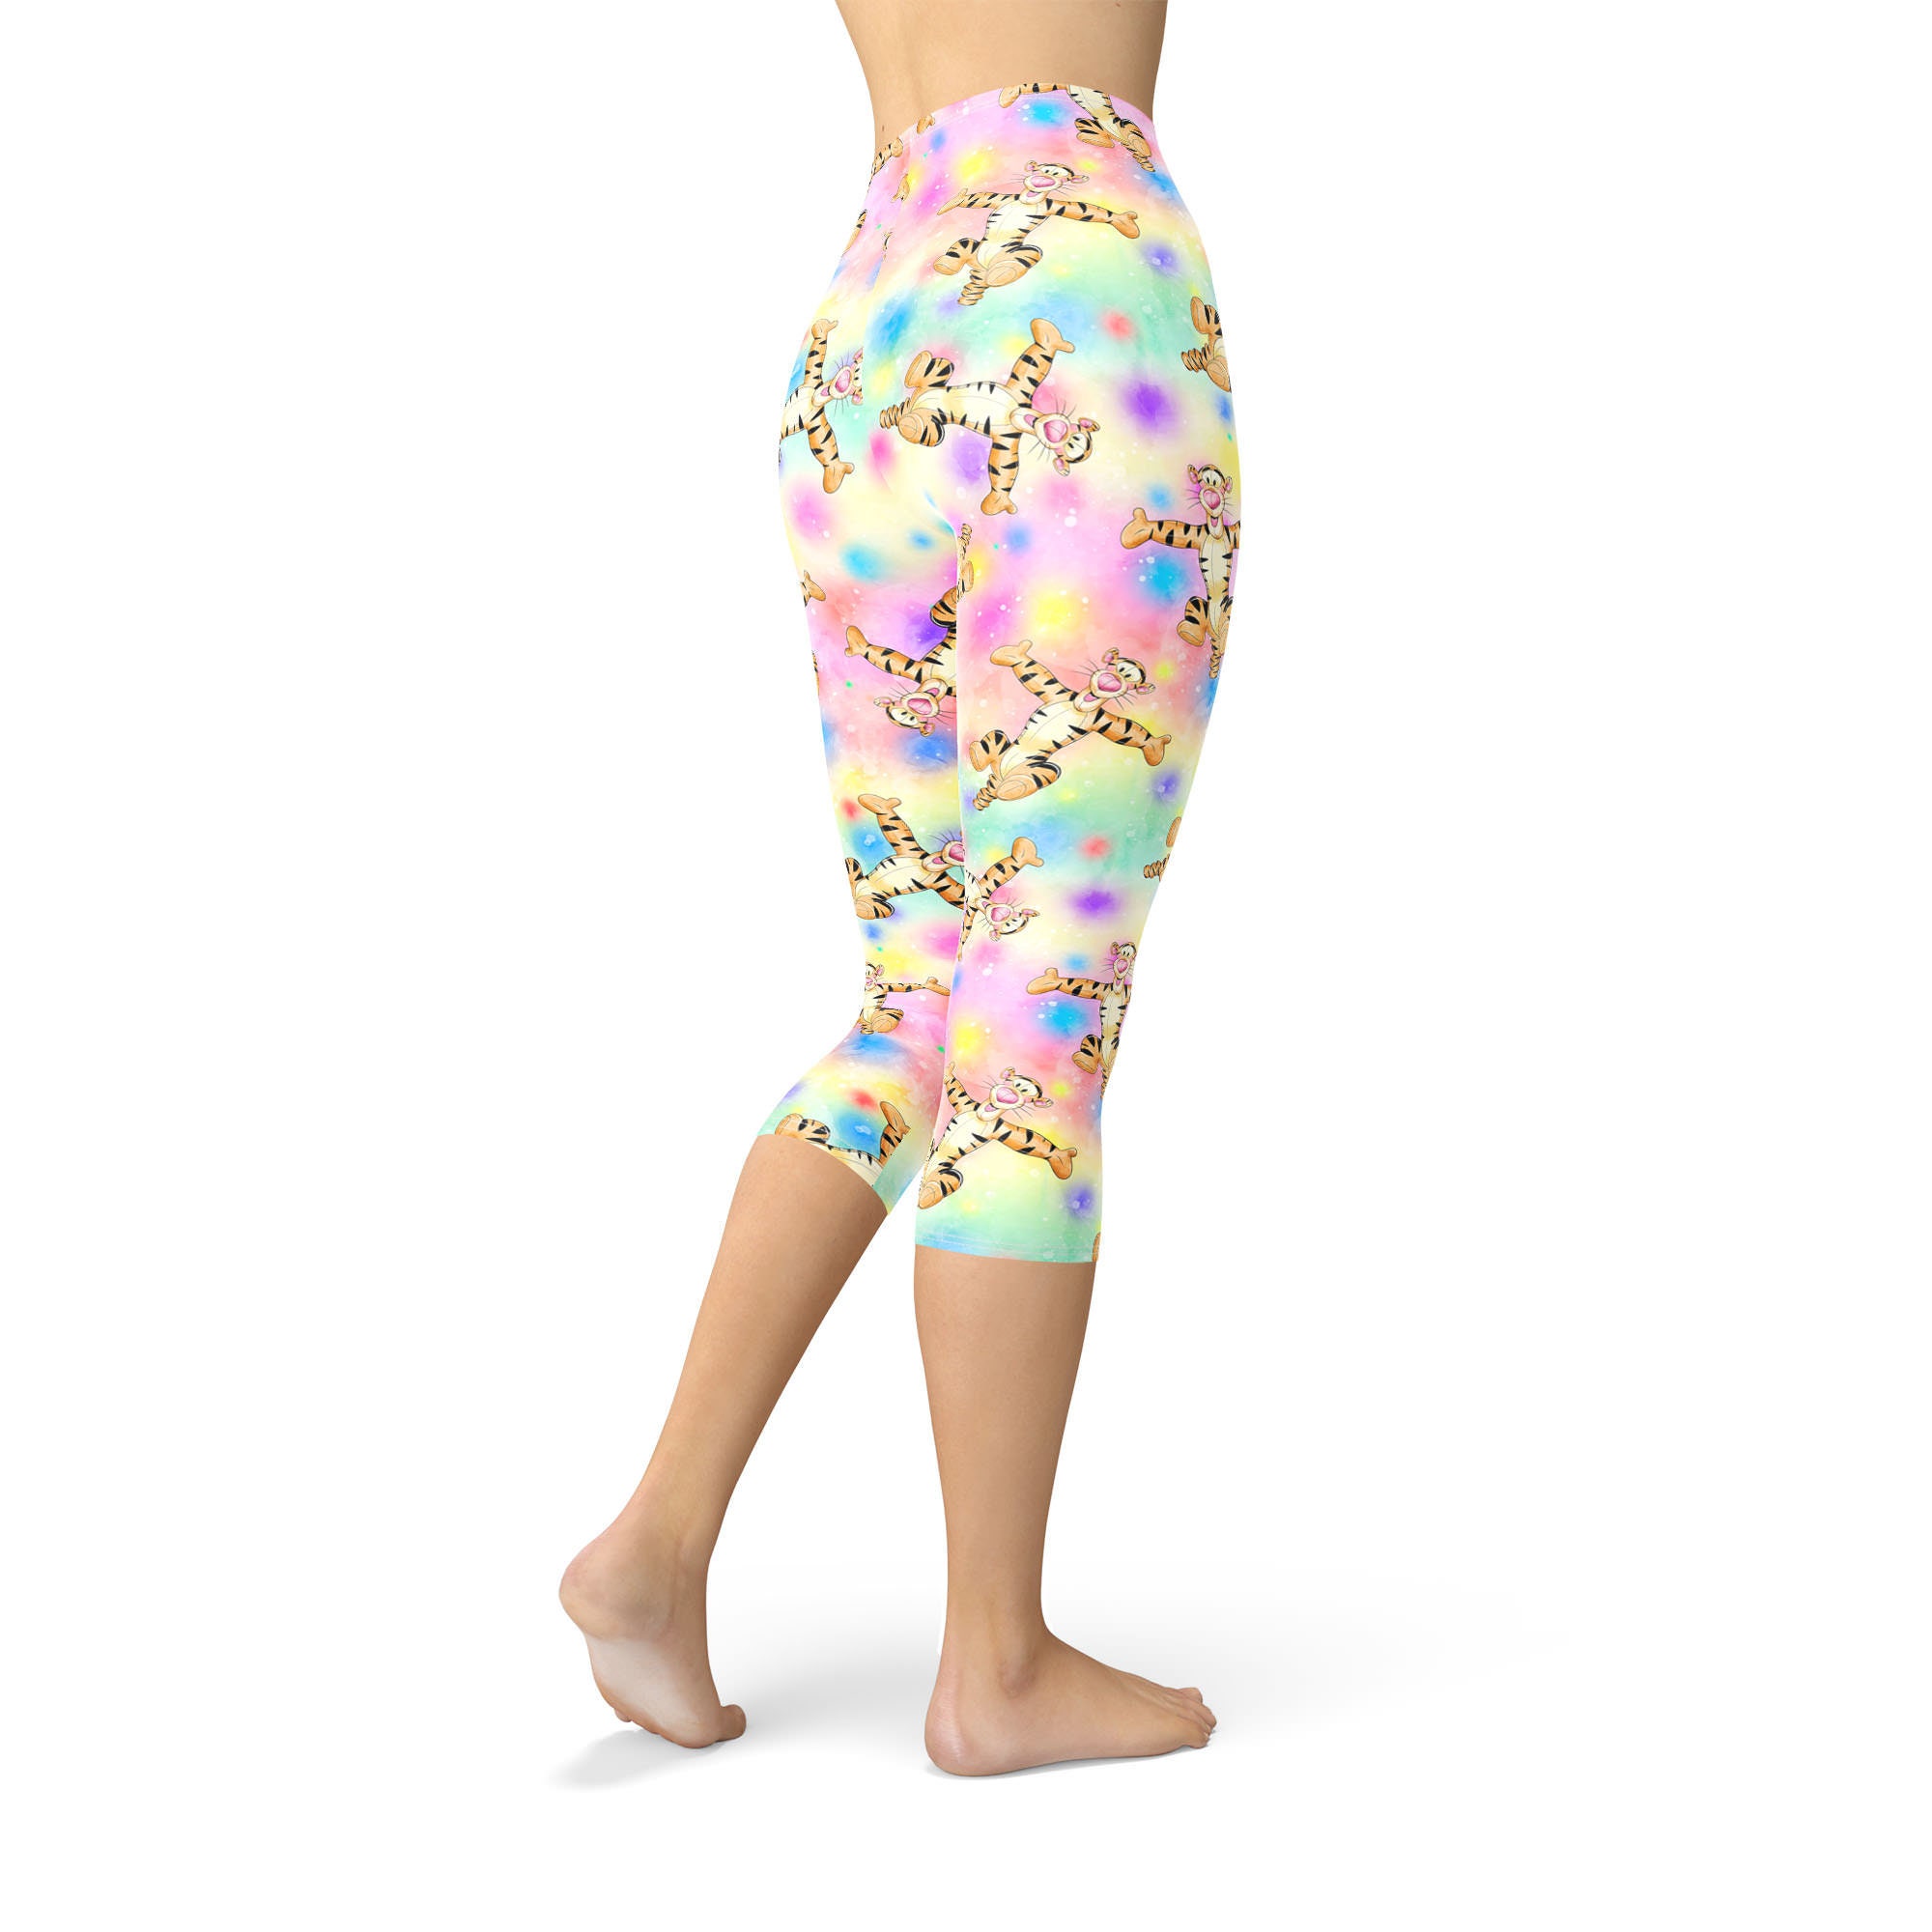 Winnie the Pooh & Friends Sketched Theme Park Inspired Leggings in Capri or  Full Length, Sports Yoga Winter Styles in Sizes XS 5XL 